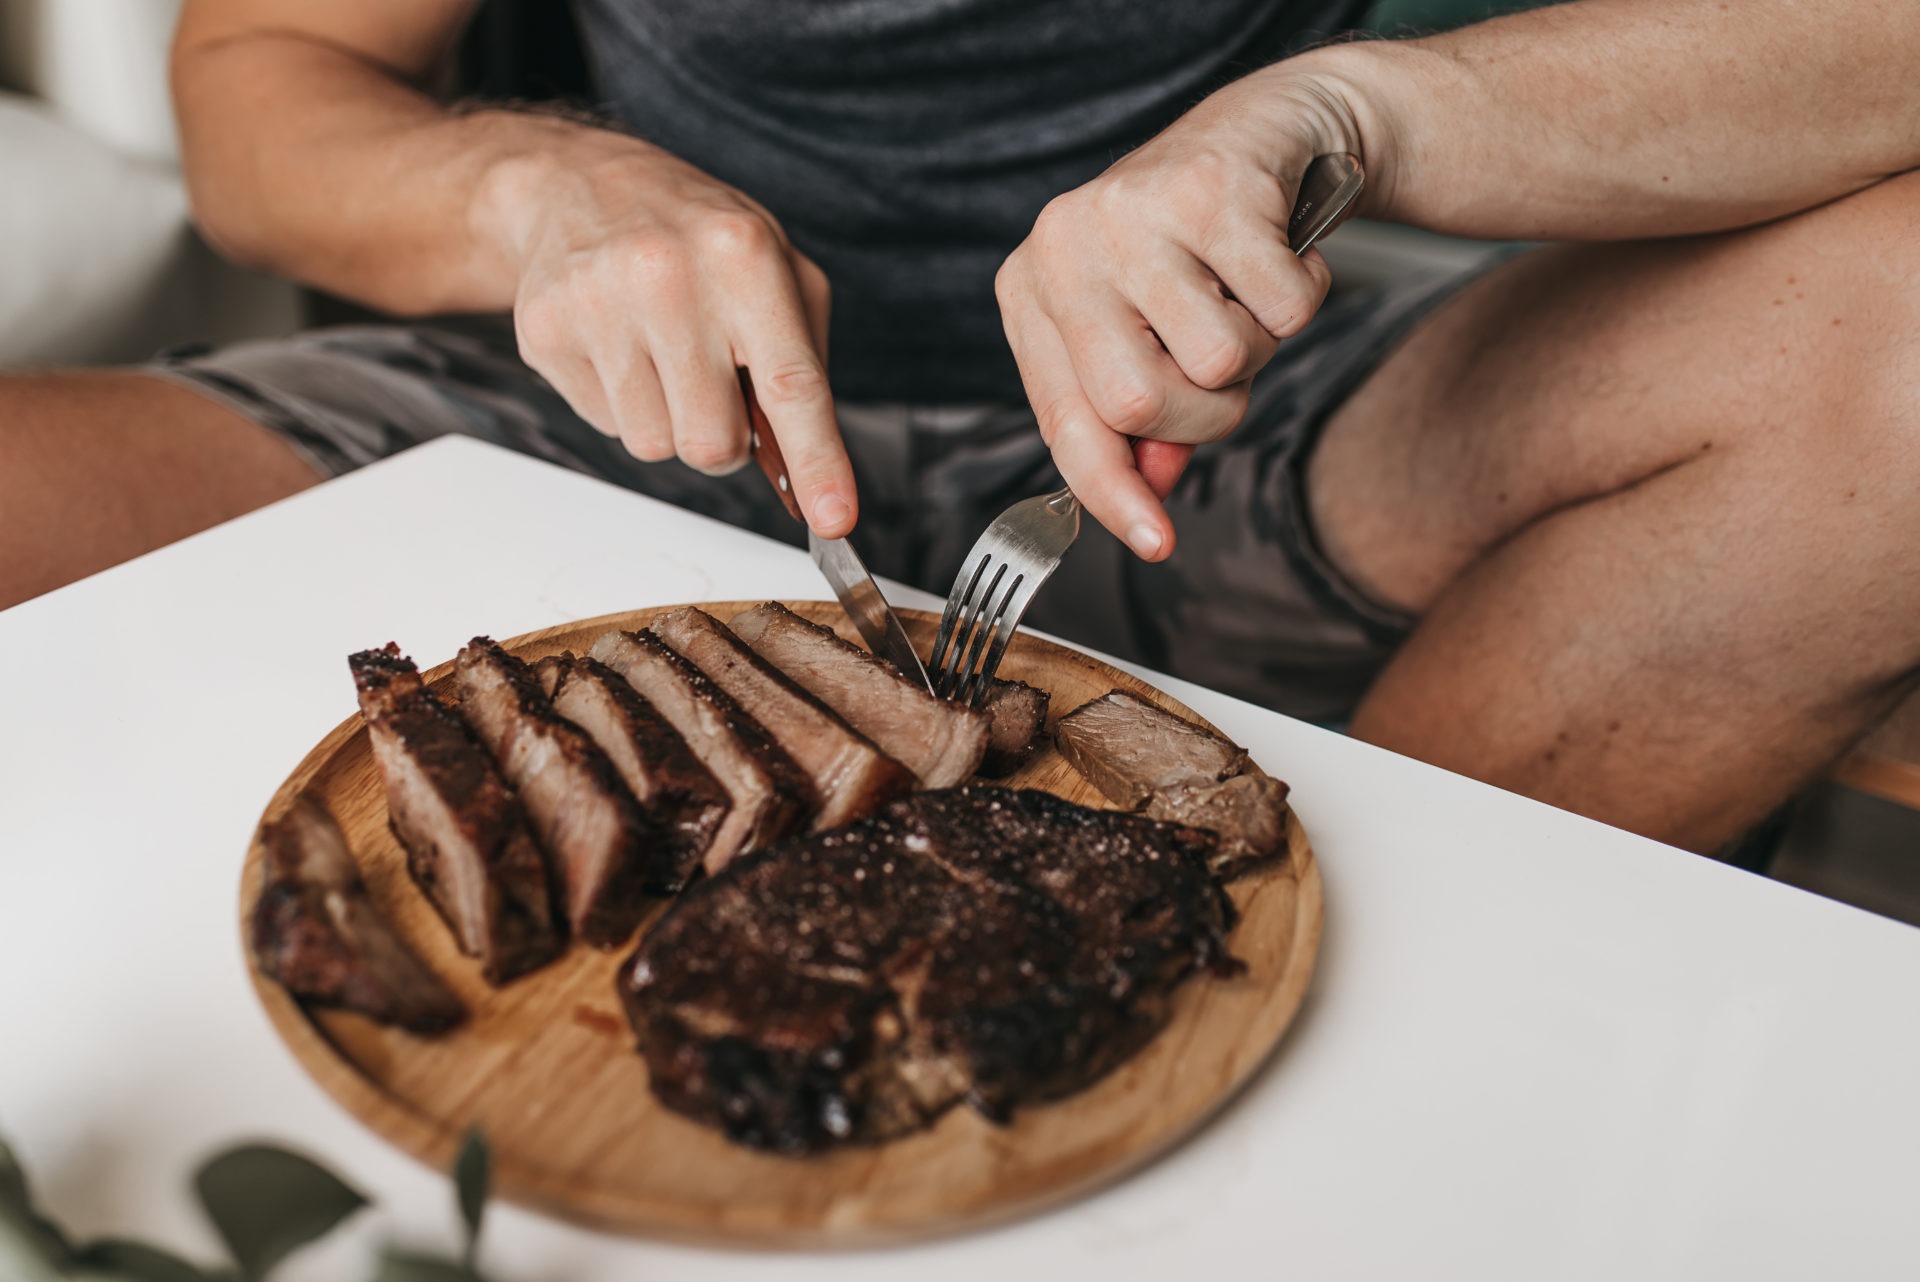 Men's meat-heavy diets cause 40% more climate emissions than